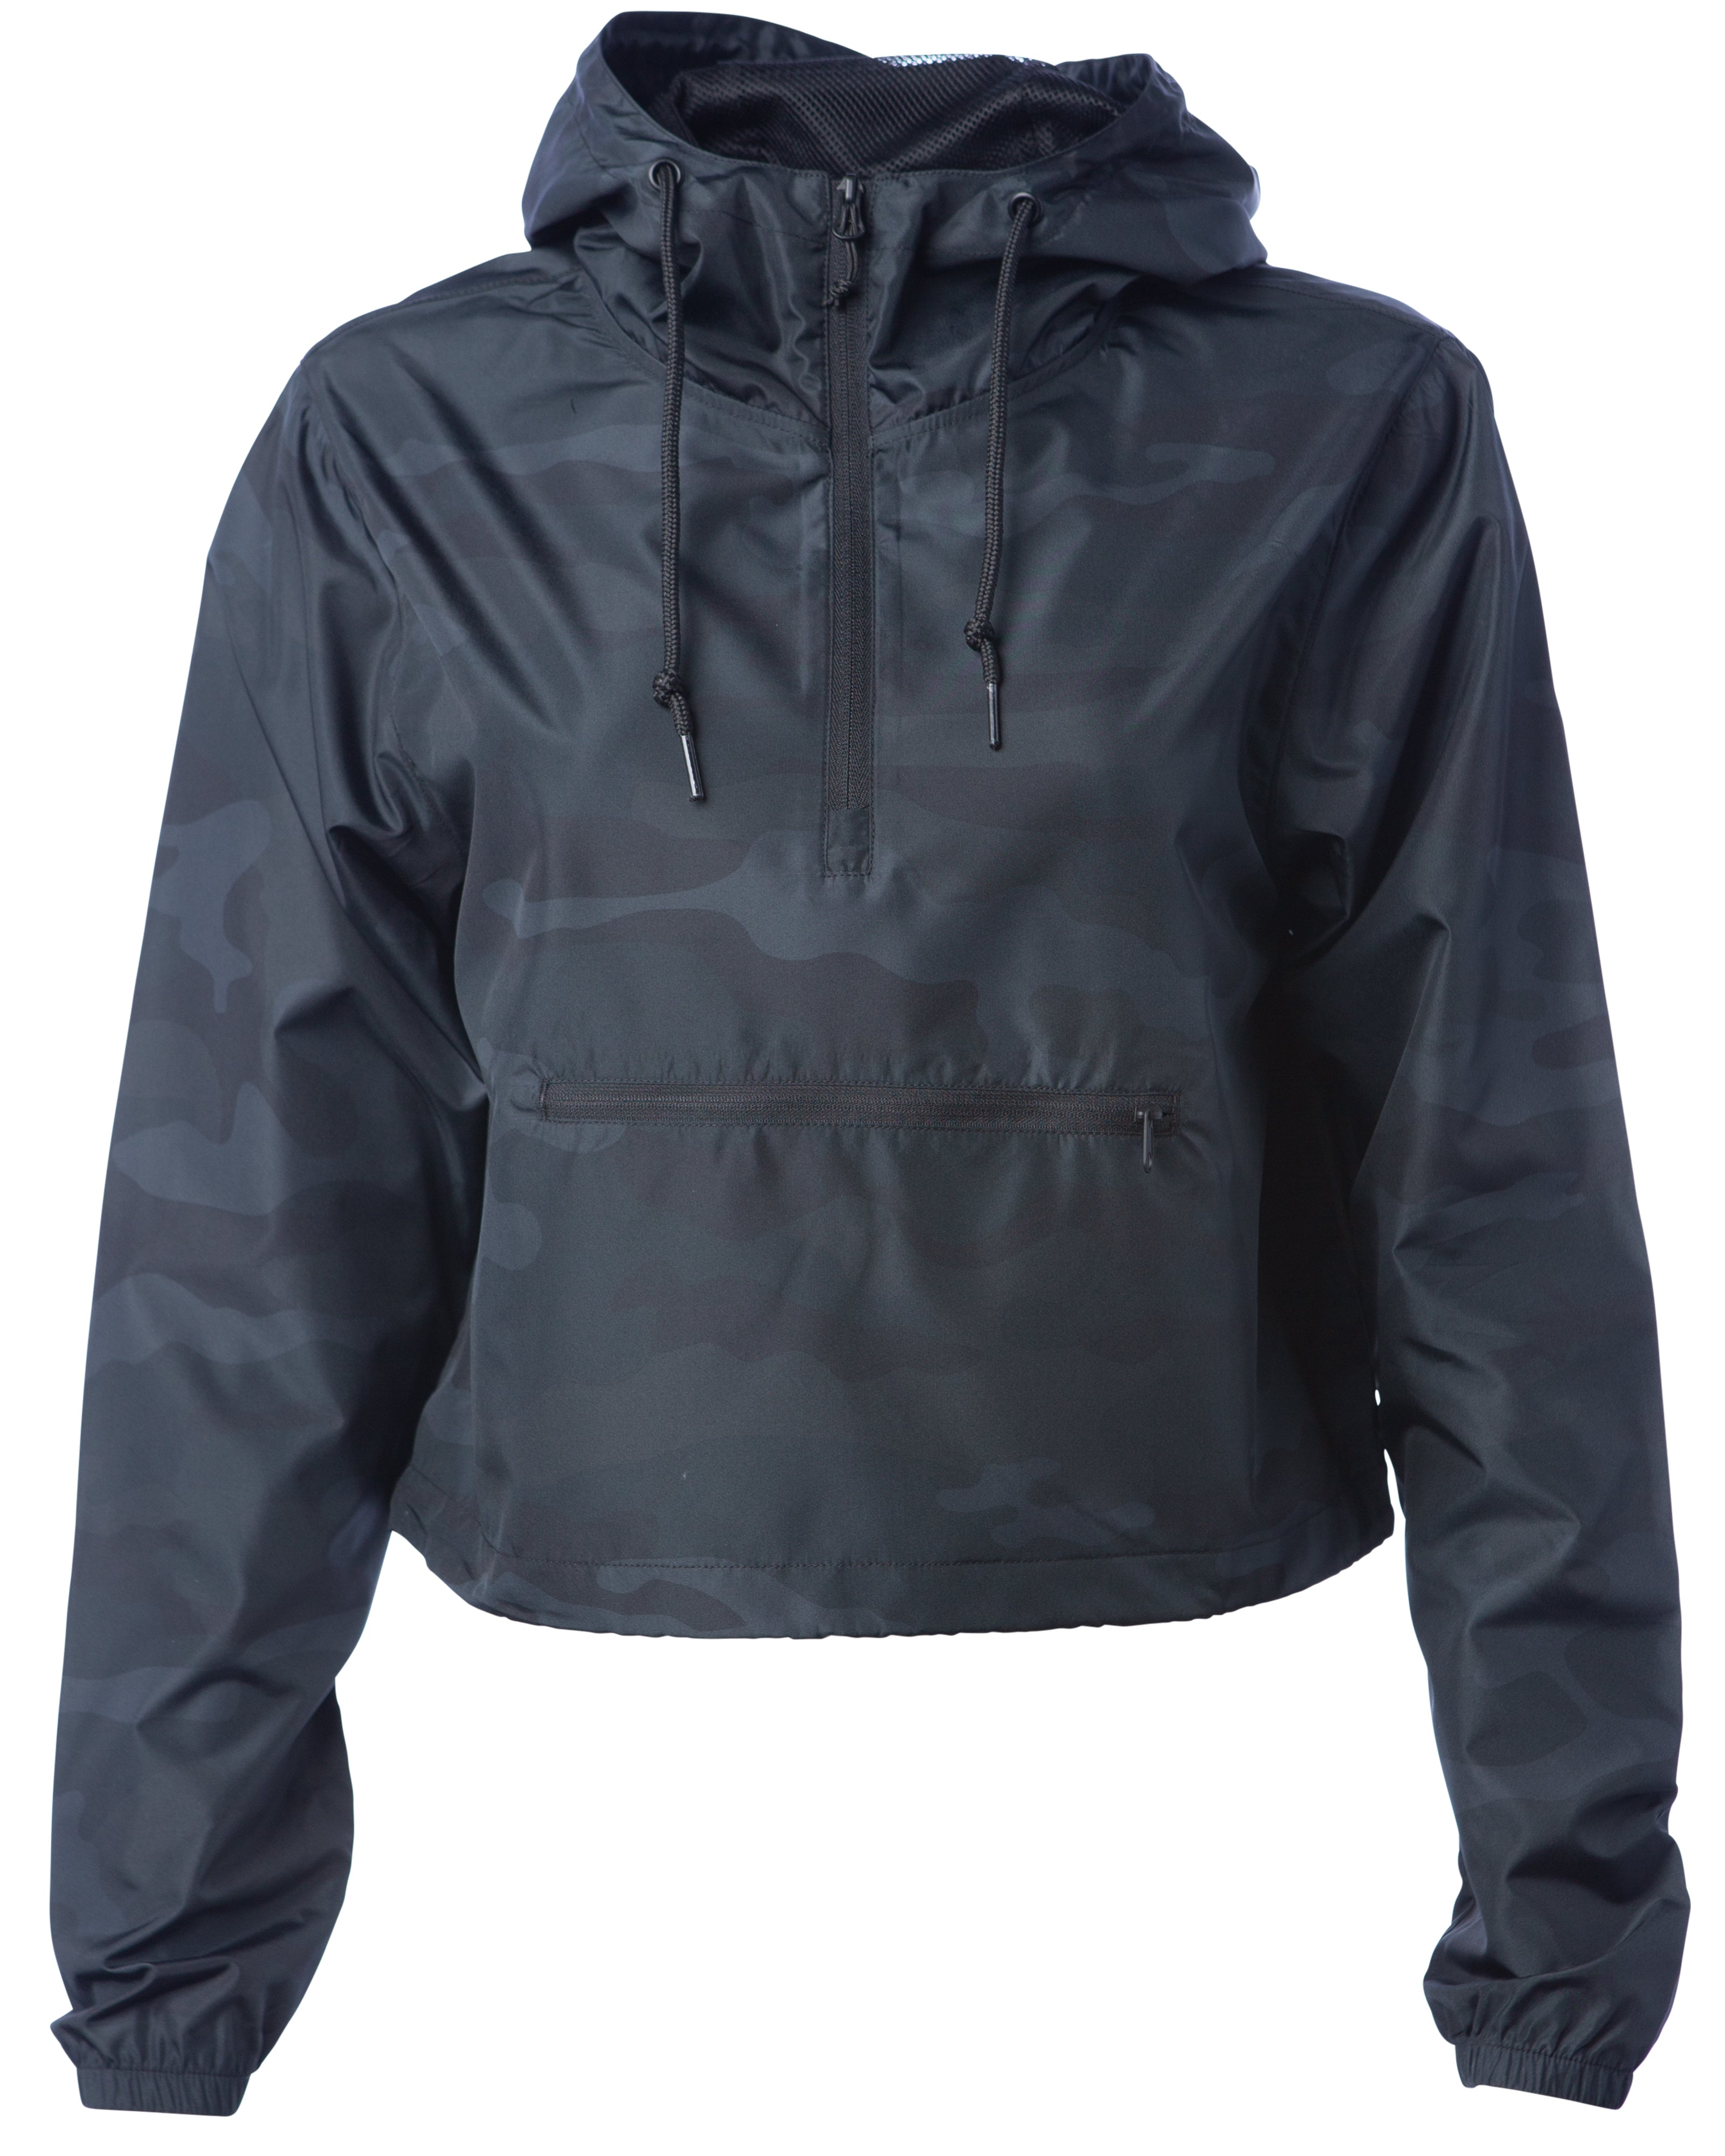 All The Way Up Women's Cropped Troposphere Windbreaker - ALL THE WAY UP